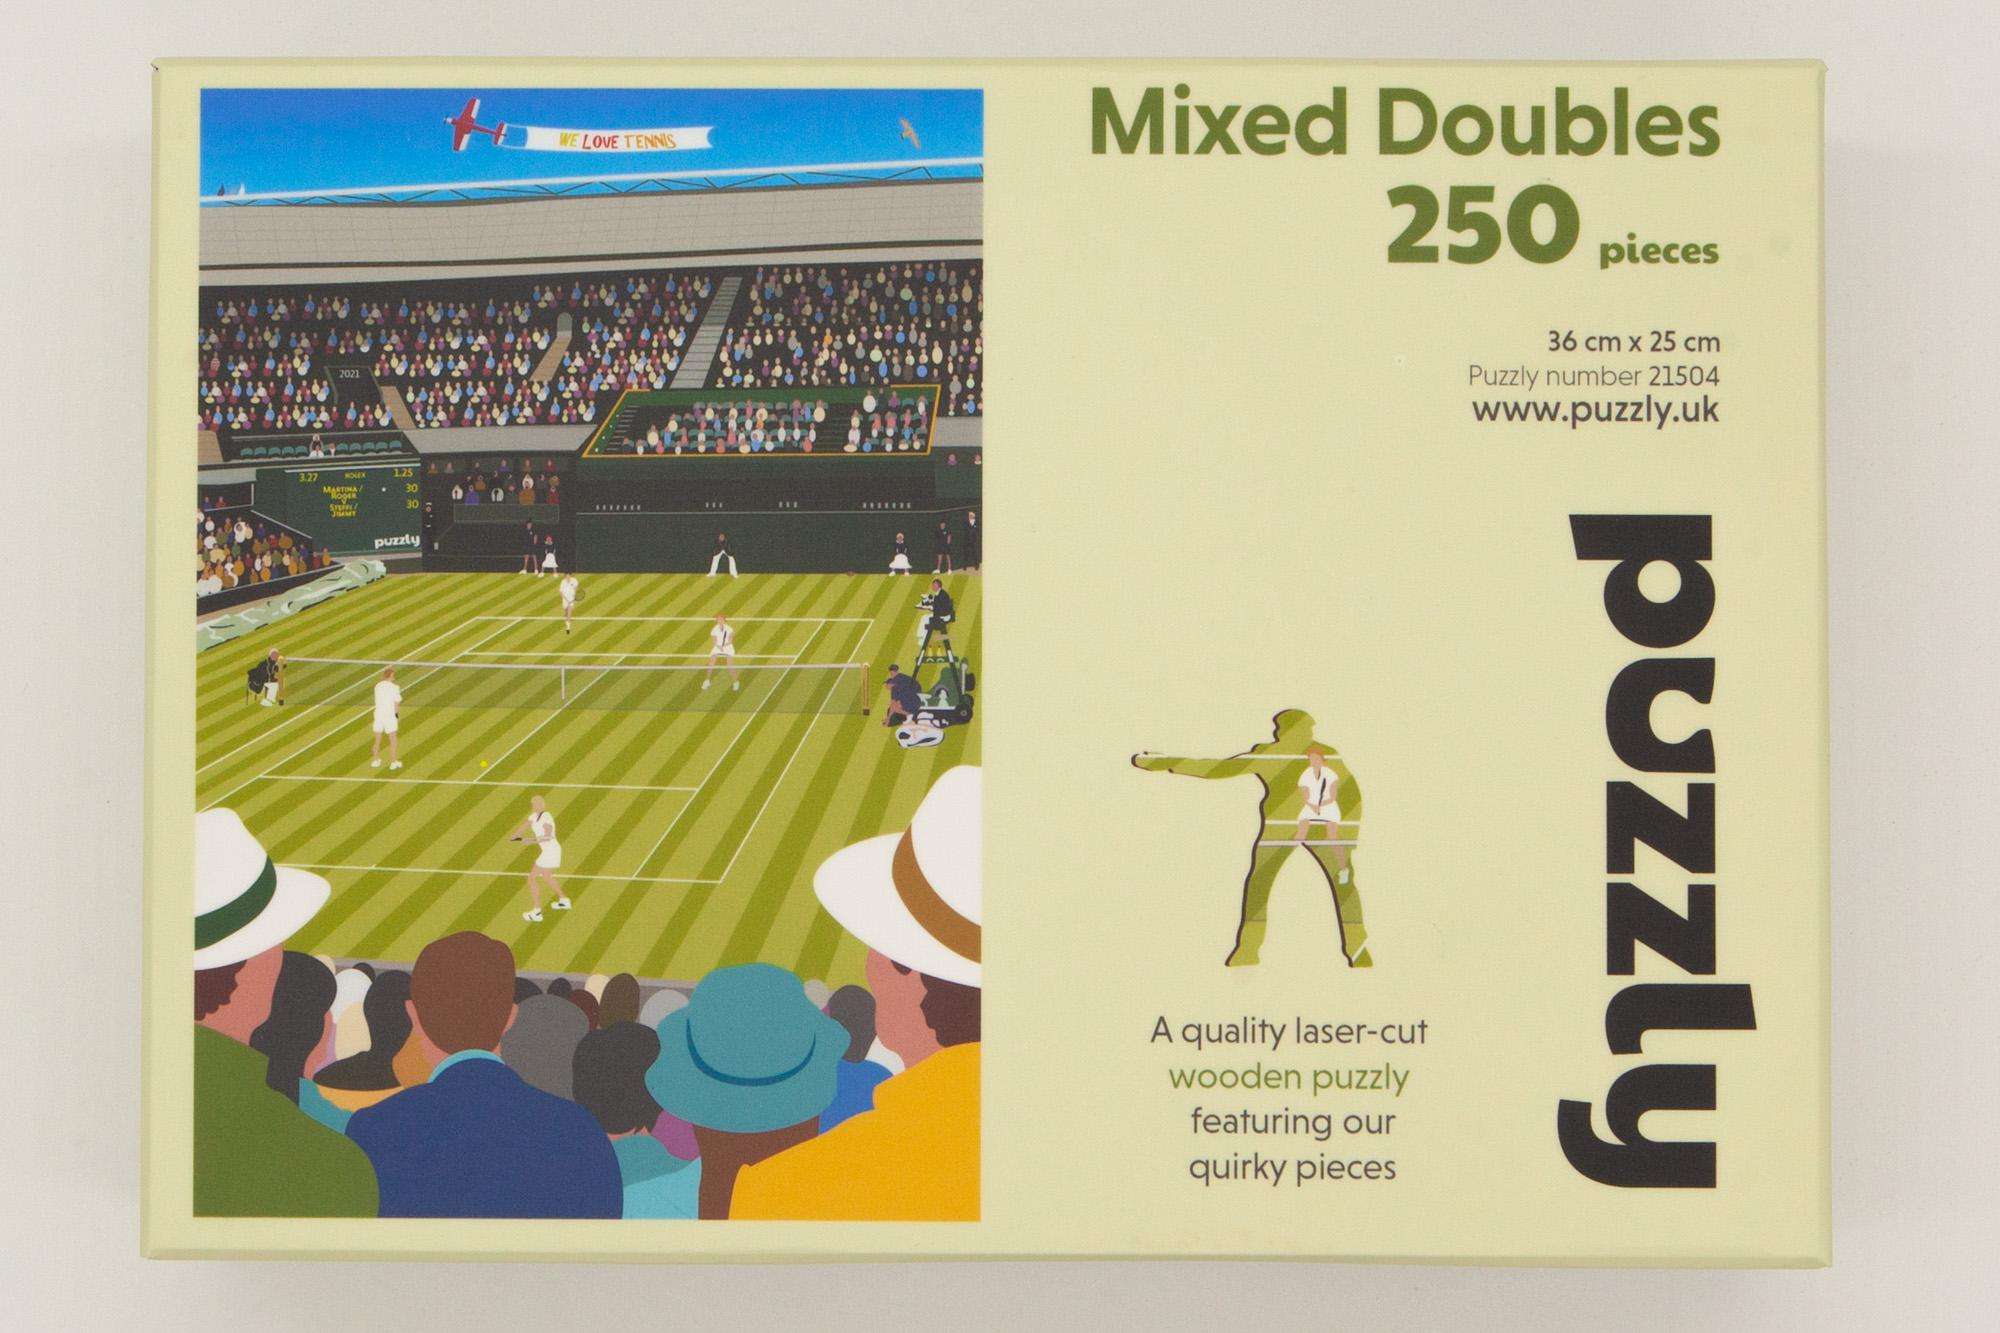 Tennis mixed doubles 250 piece wooden puzzle